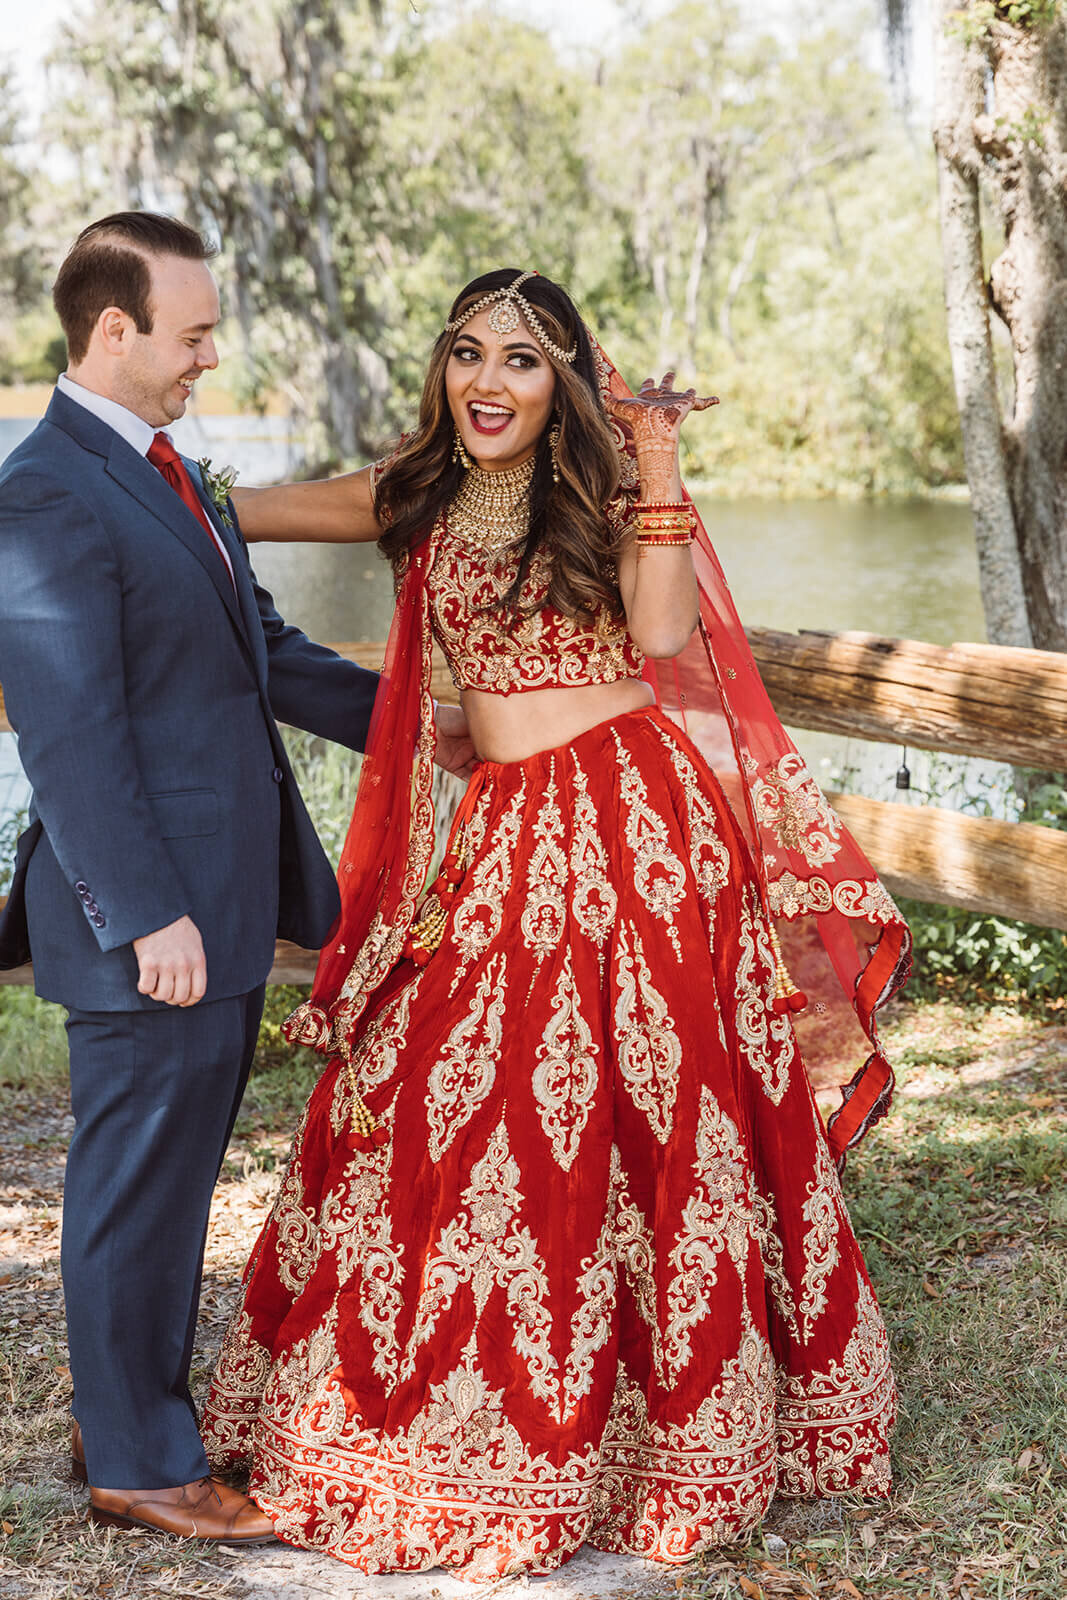 Three of the best… traditional wedding dresses - Inspiration | All Posts